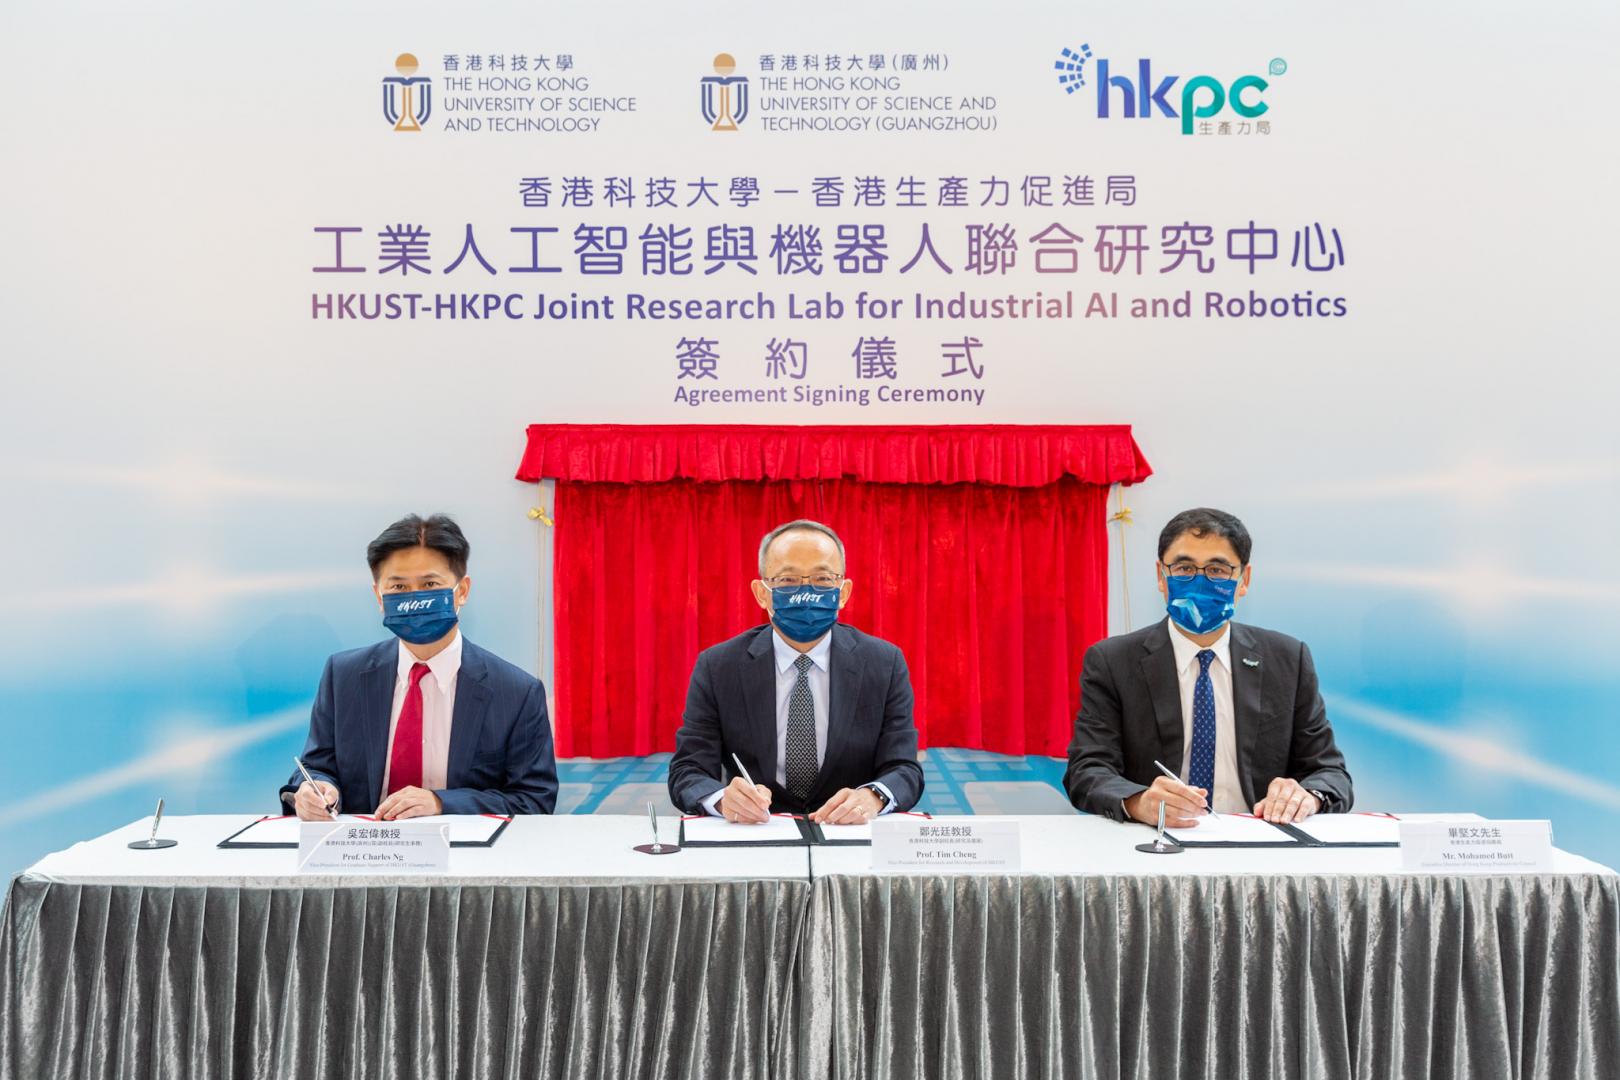 (From left) Prof. Charles Ng Wang-Wai, Vice-President for Graduate Support of HKUST (GZ) and CLP Holdings Professor of Sustainability of HKUST; Prof. Tim Cheng, Vice-President for Research and Development of HKUST; and Mr. Mohamed Butt, Executive Director of HKPC, sign the agreement to establish HKUST-HKPC Joint Research Lab for Industrial AI and Robotics.